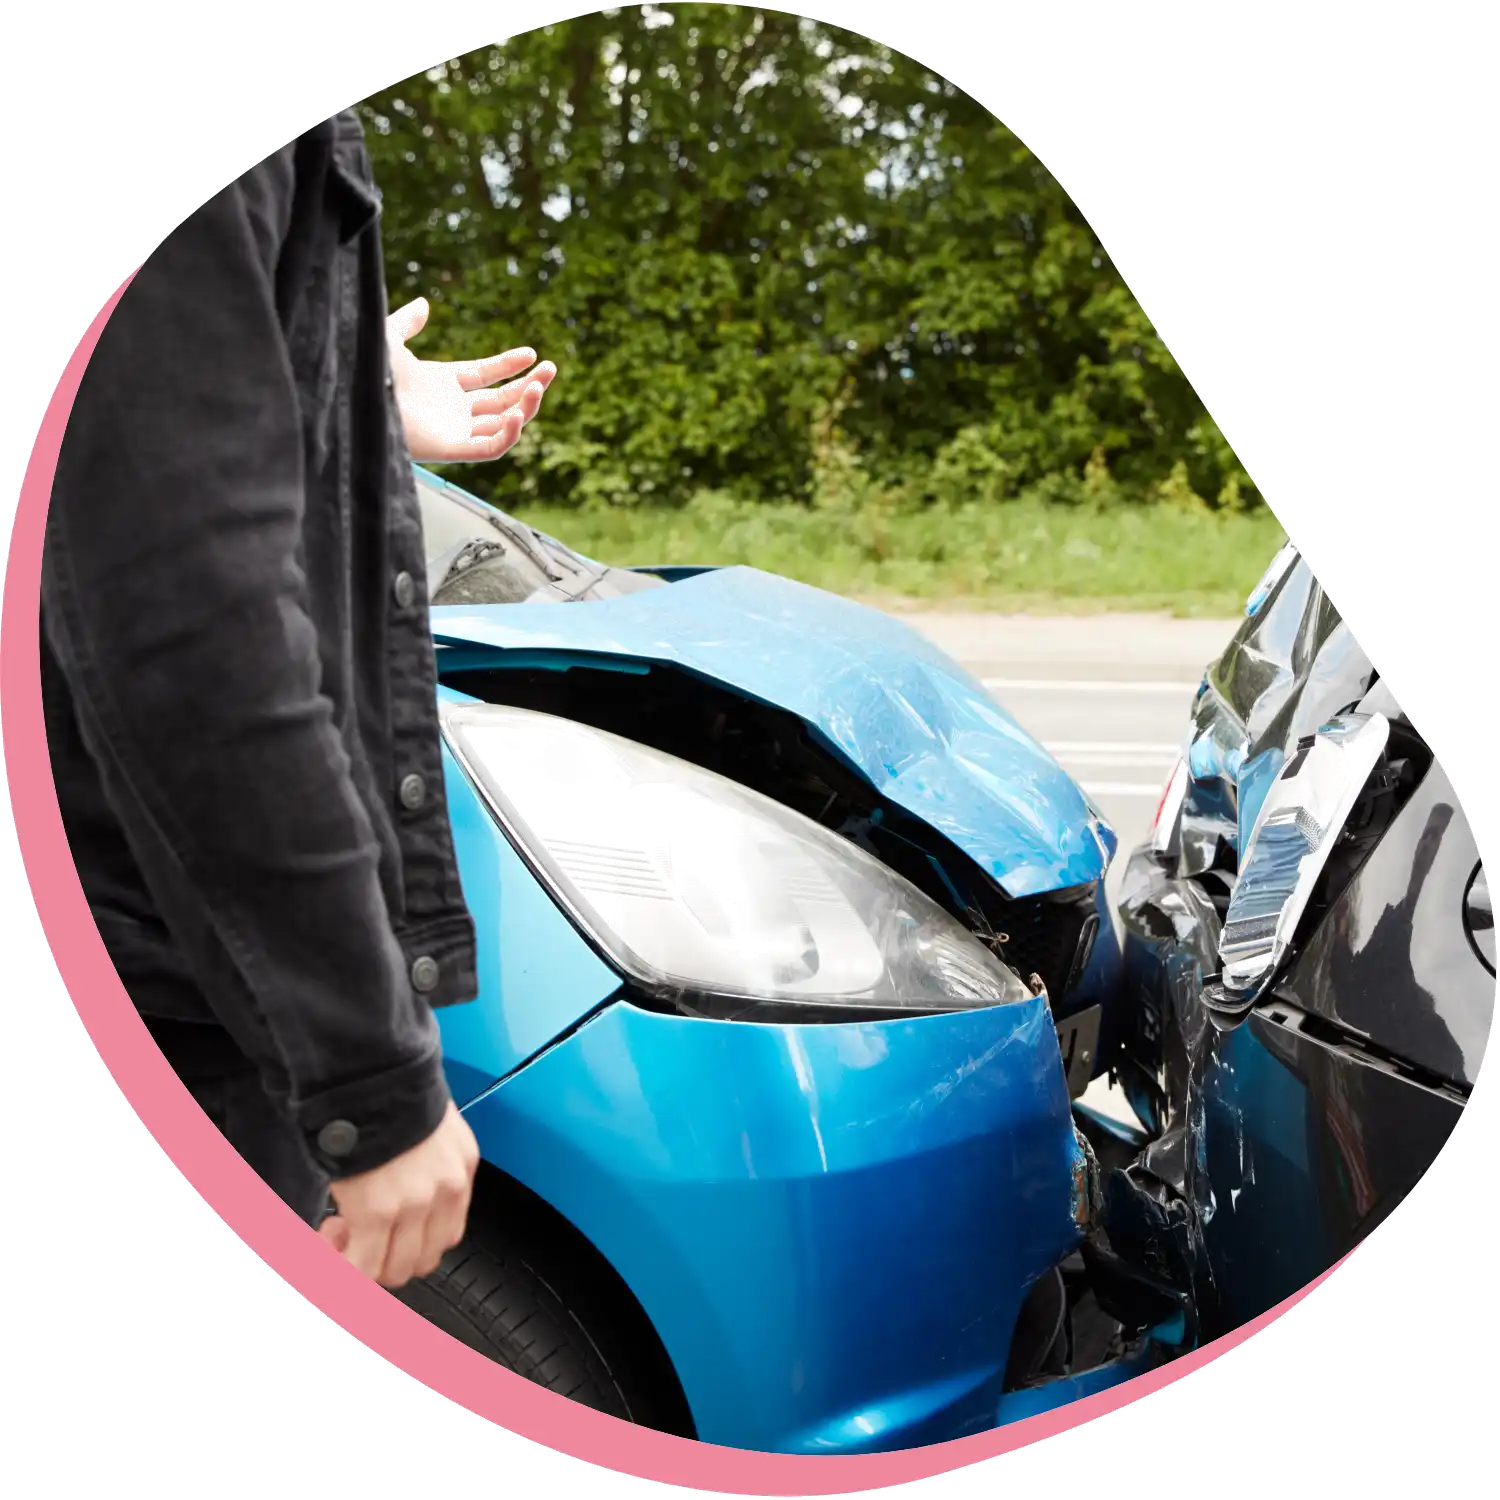 Your Car Was Hit By an Uninsured Driver - What's Next? - LawsuitLoans.io explains the avenues for recovery after an accident with an uninsured driver